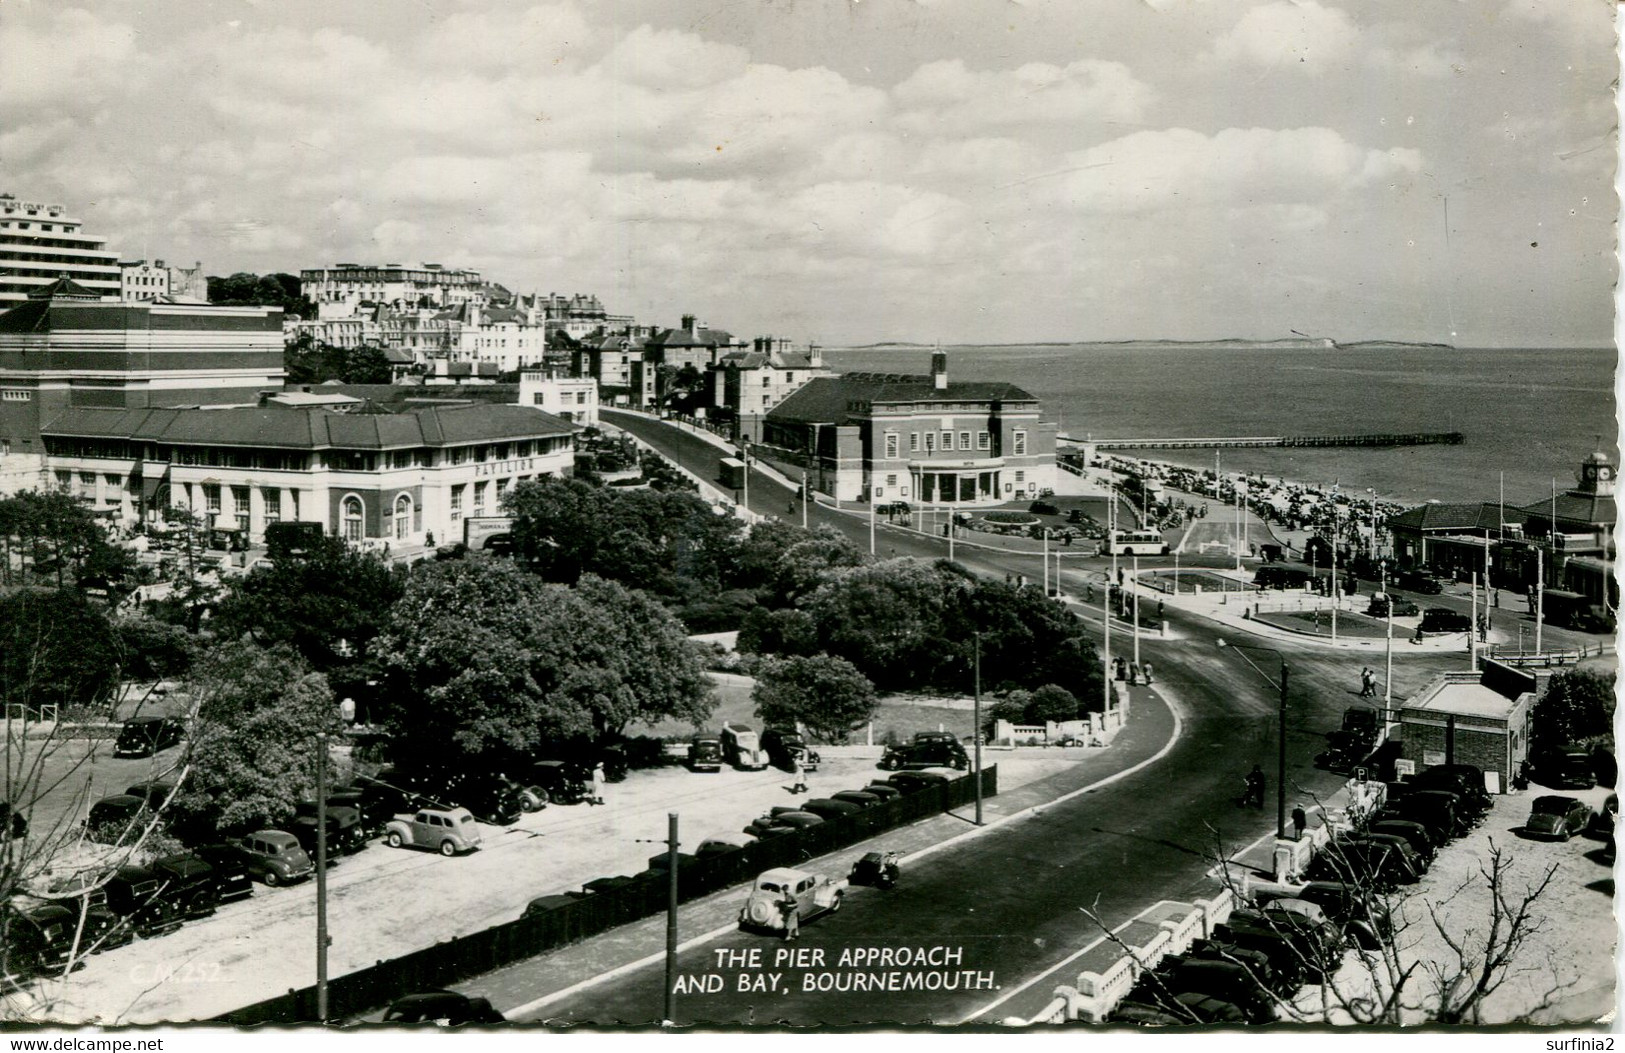 DORSET - BOURNEMOUTH - THE PIER APPROACH AND BAY RP Do1090 - Bournemouth (until 1972)